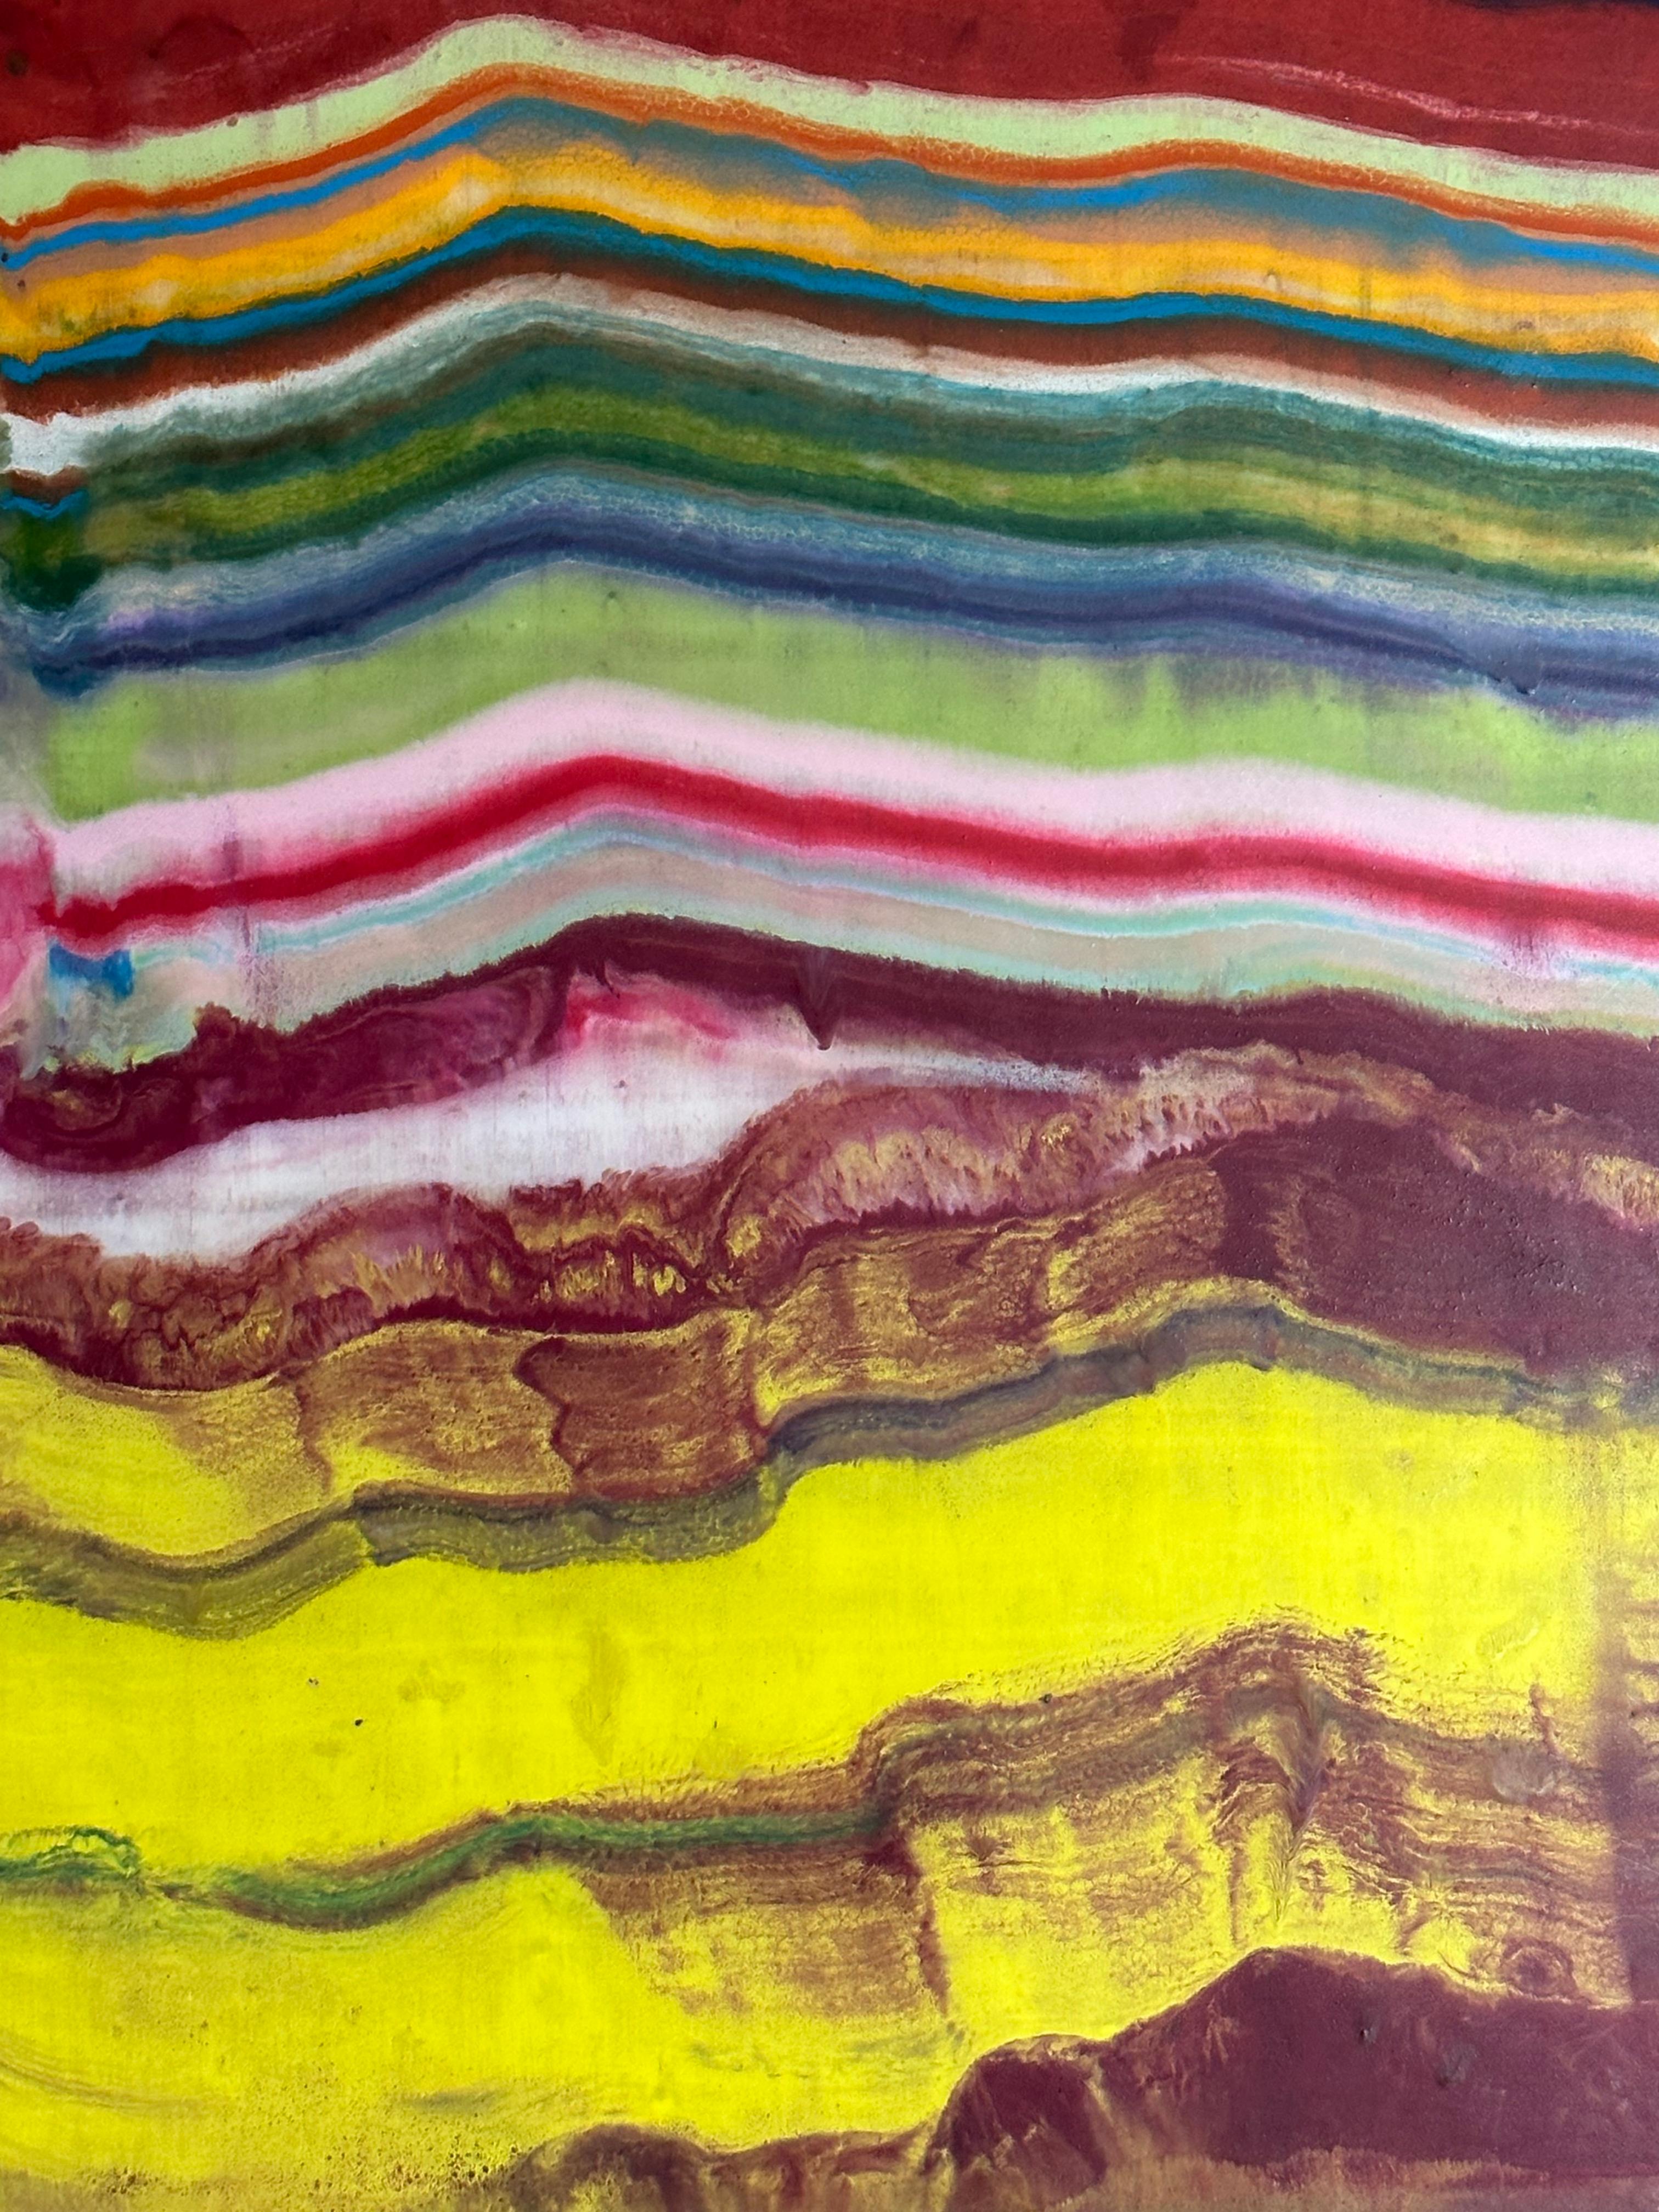 Ex Uno Plures Seven, Bright Neon Yellow, Brown, Magenta, Pink Encaustic Monotype - Contemporary Print by Laura Moriarty